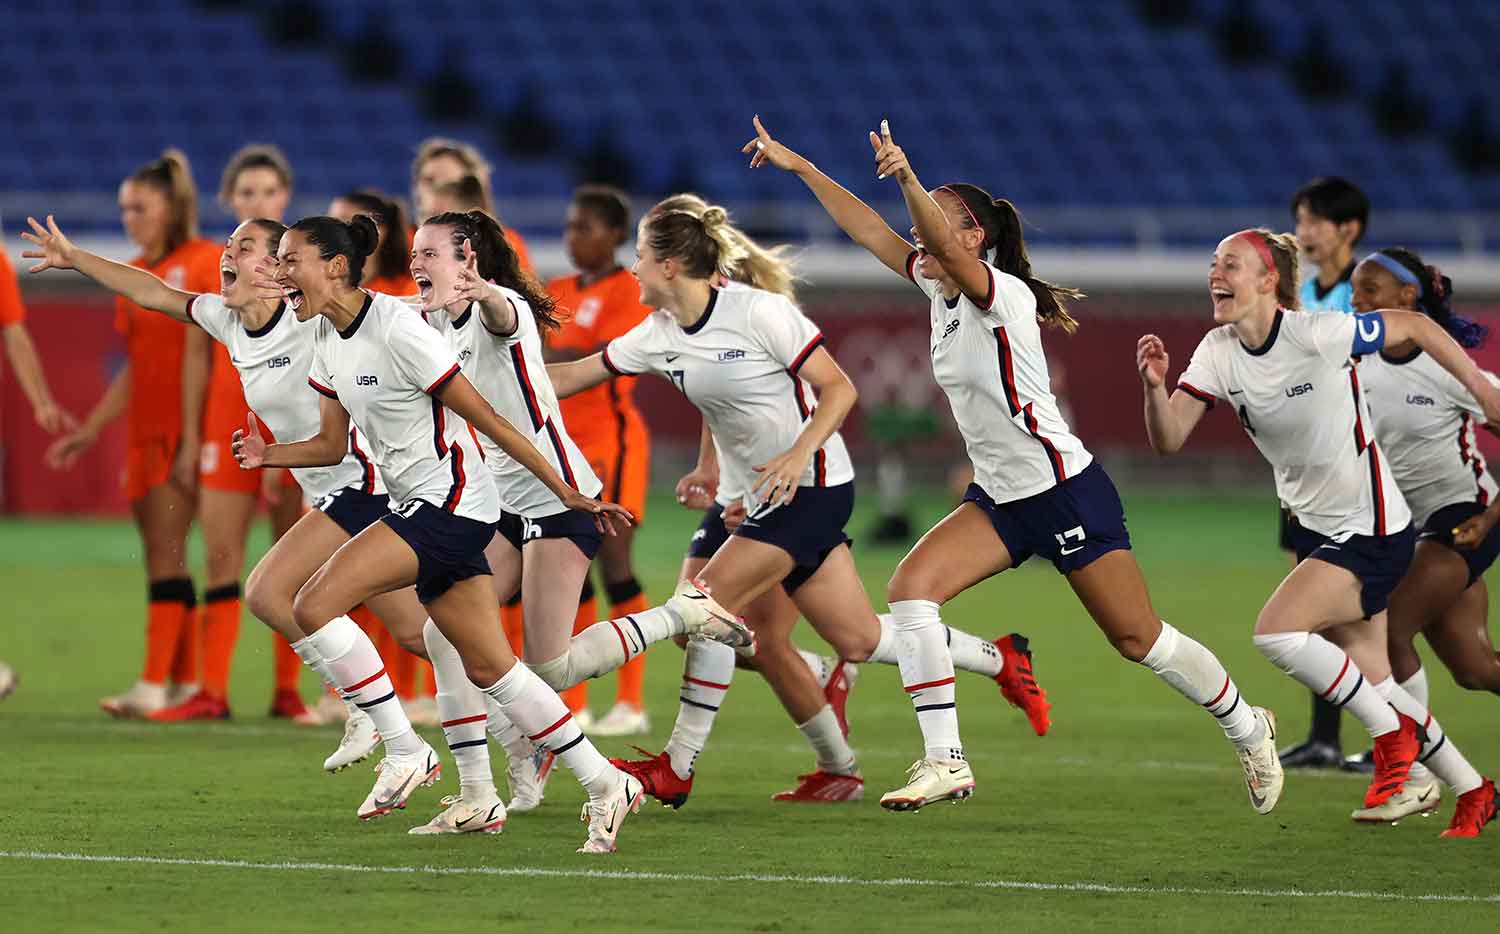 The U.S. women’s soccer team running and celebrating on a soccer field while another team looks on